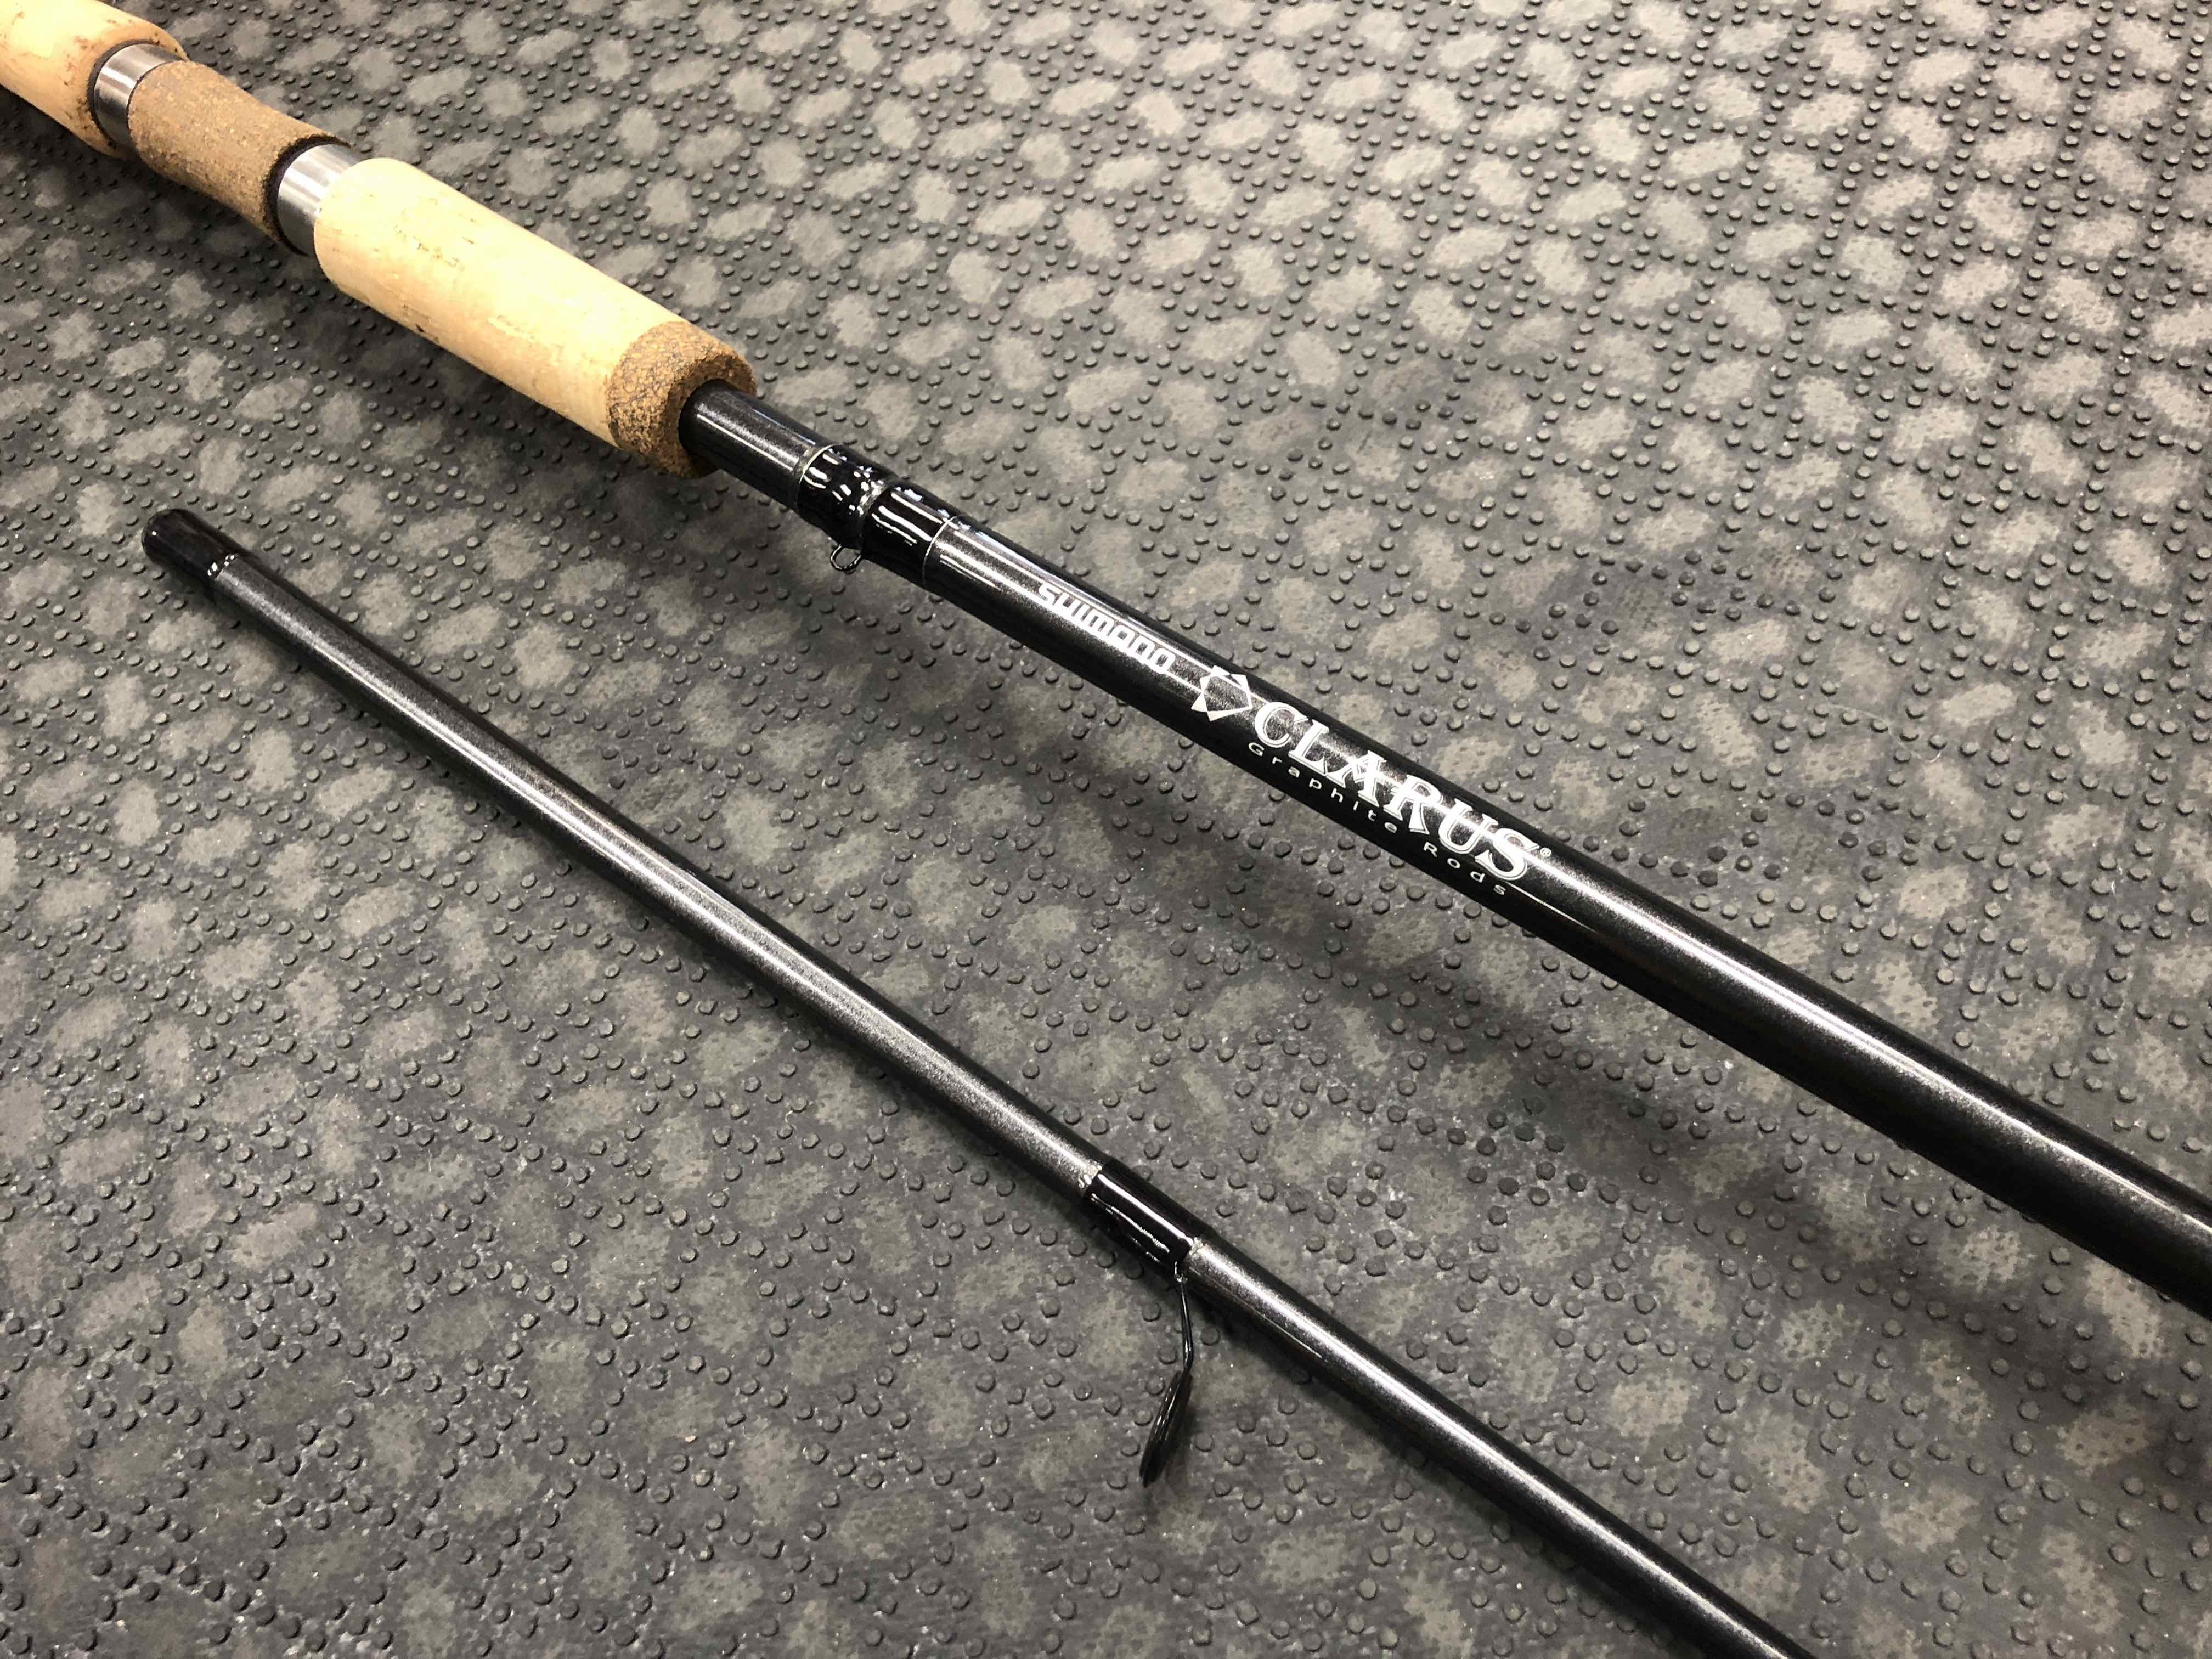 Shimano Clarus - CSS100-M2B - 10’ 2Pc Spinning Rod - GREAT SHAPE! - $80